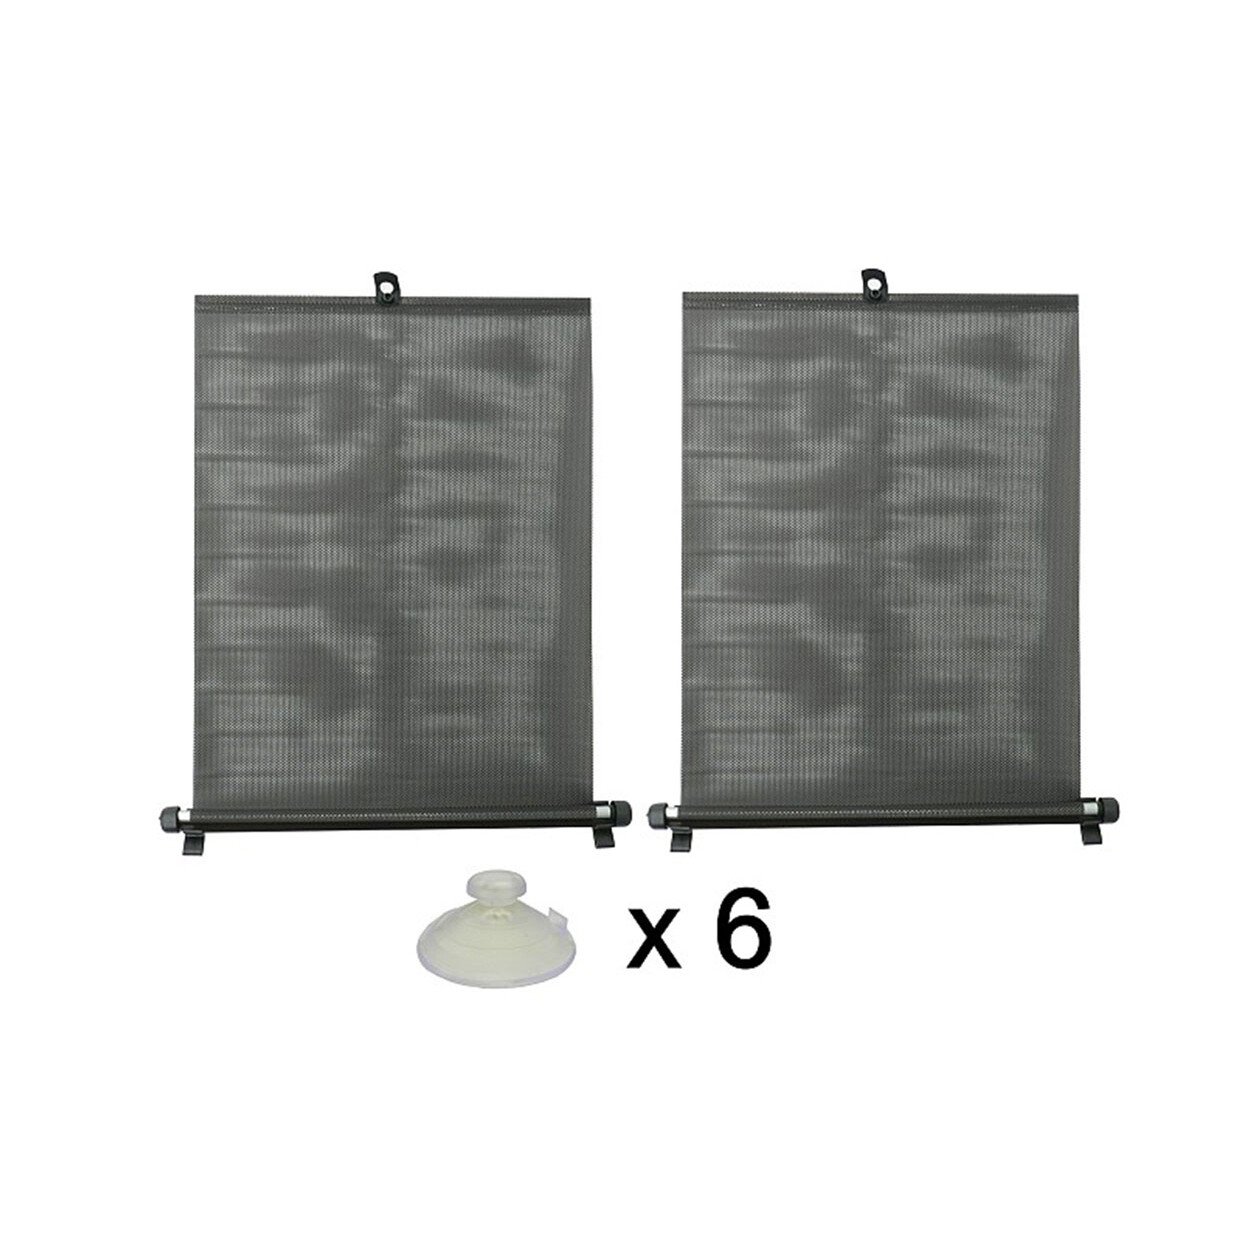 Amio roller sunshade with suction cups 2pcs, 55cm, Black thumb